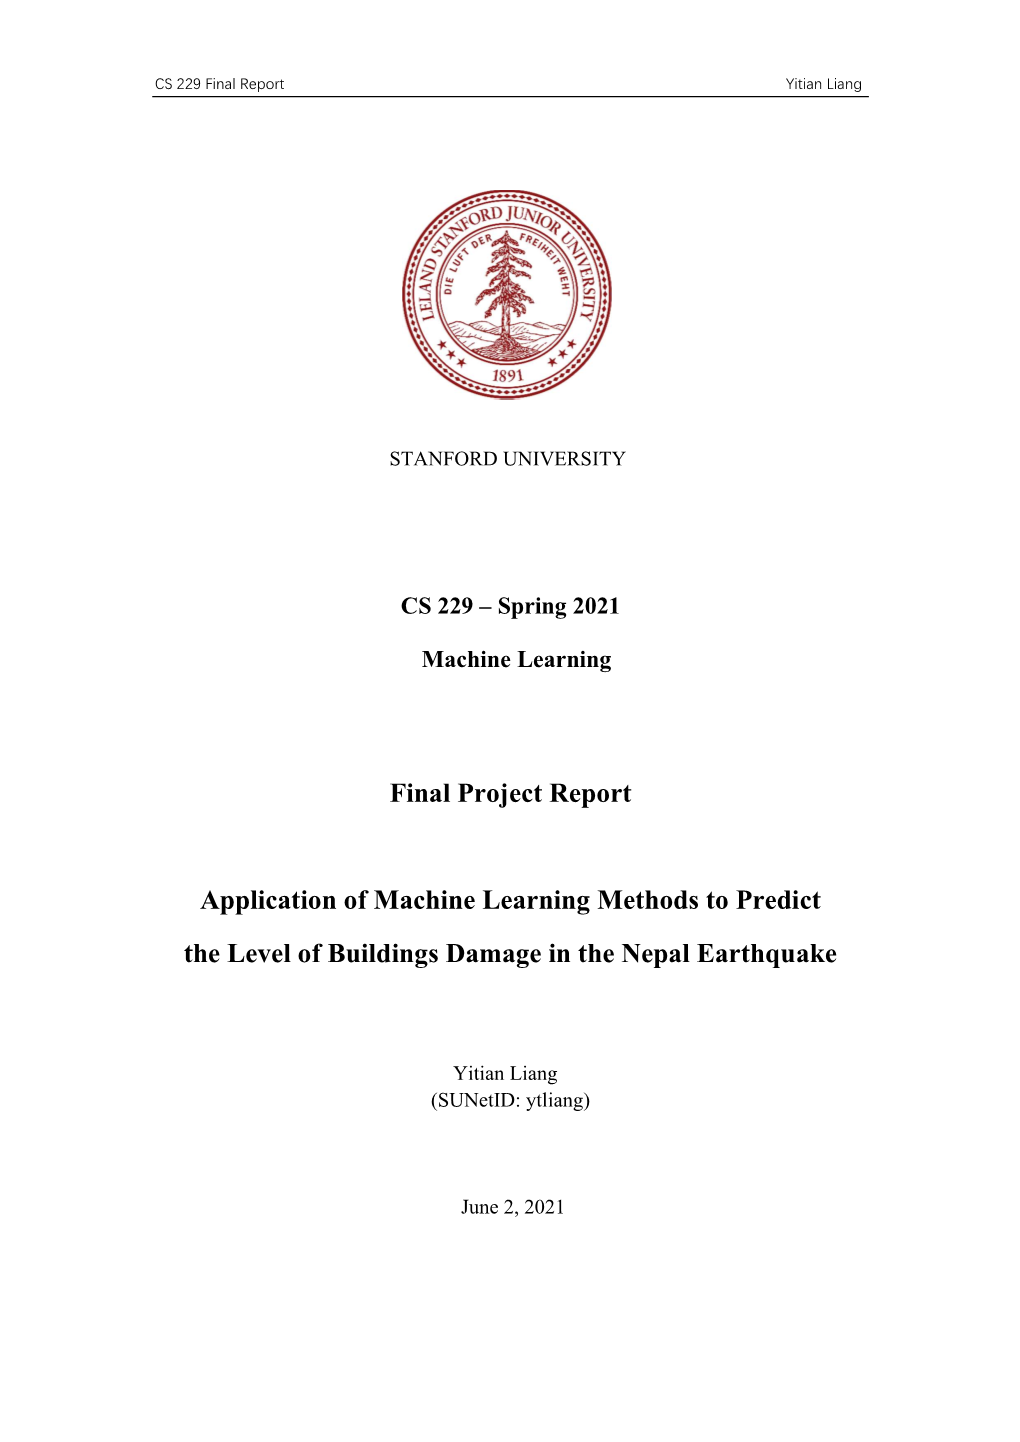 Final Project Report Application of Machine Learning Methods To